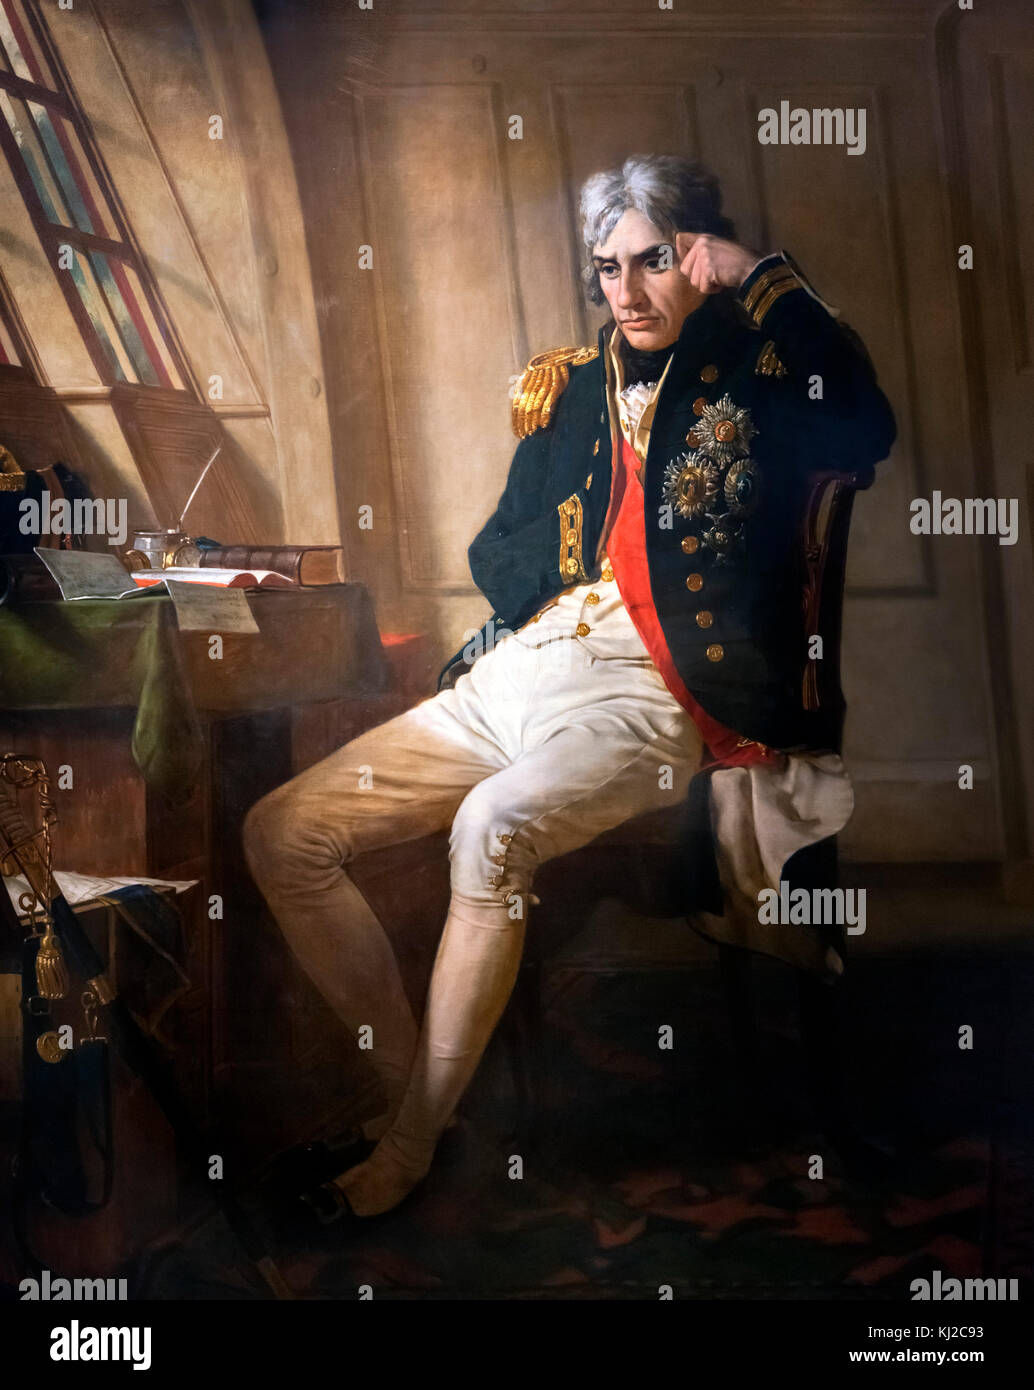 Vice Admiral Lord Nelson by Charles Lucy, oil on canvas, 1853. The portrait shows Horatio Nelson in his cabin on HMS Victory on the morning of the Battle of Trafalgar. Stock Photo